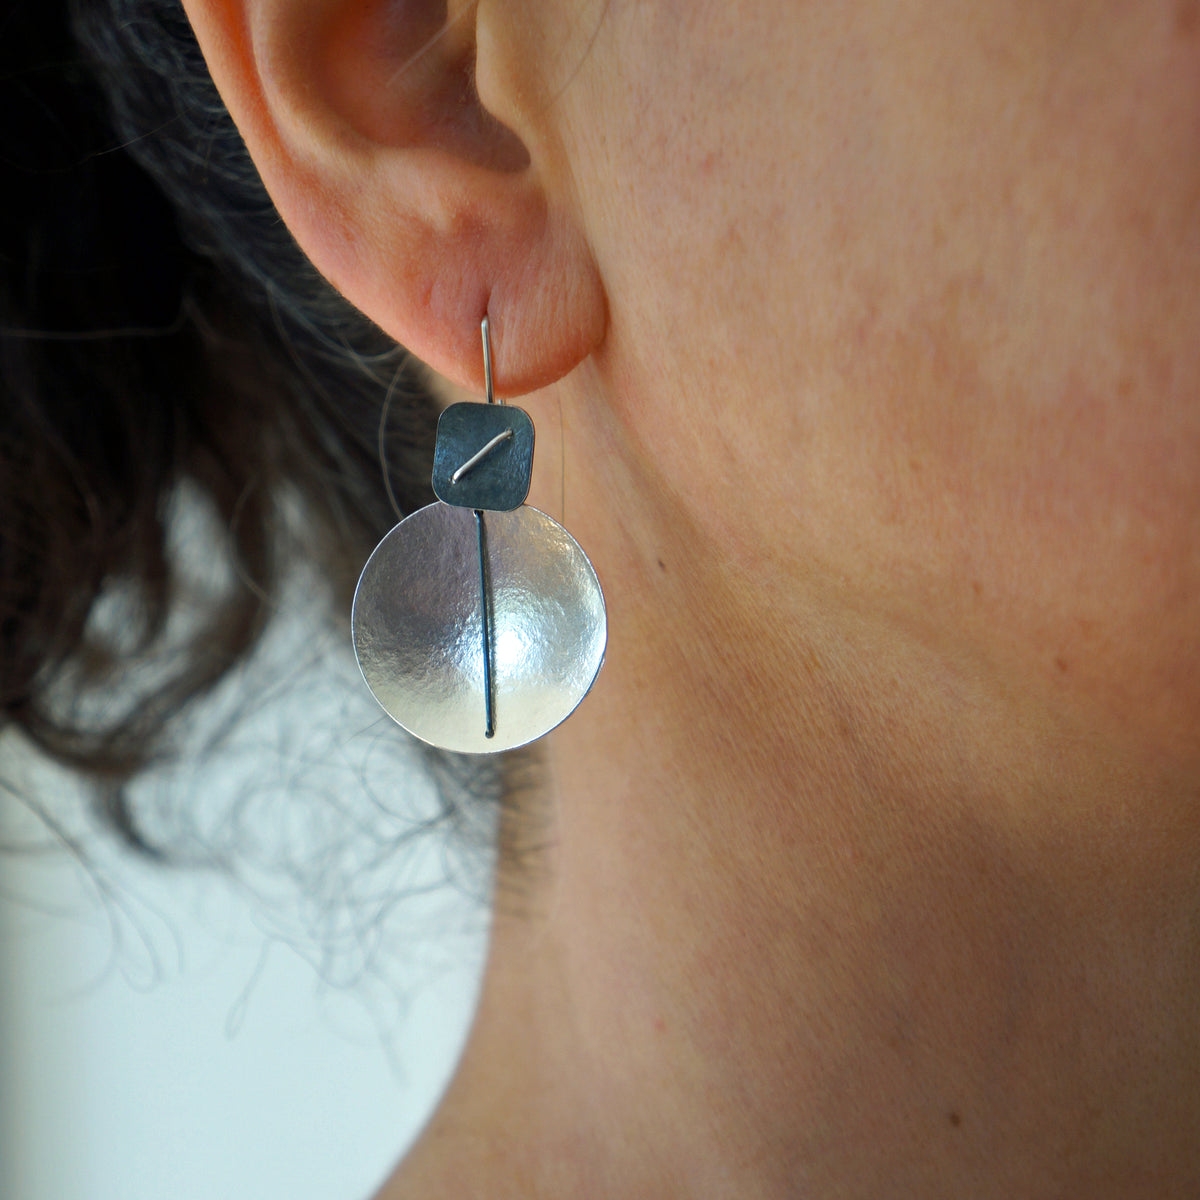 Suzanne Schwartz Wearing Circle and Square Hanging Earring